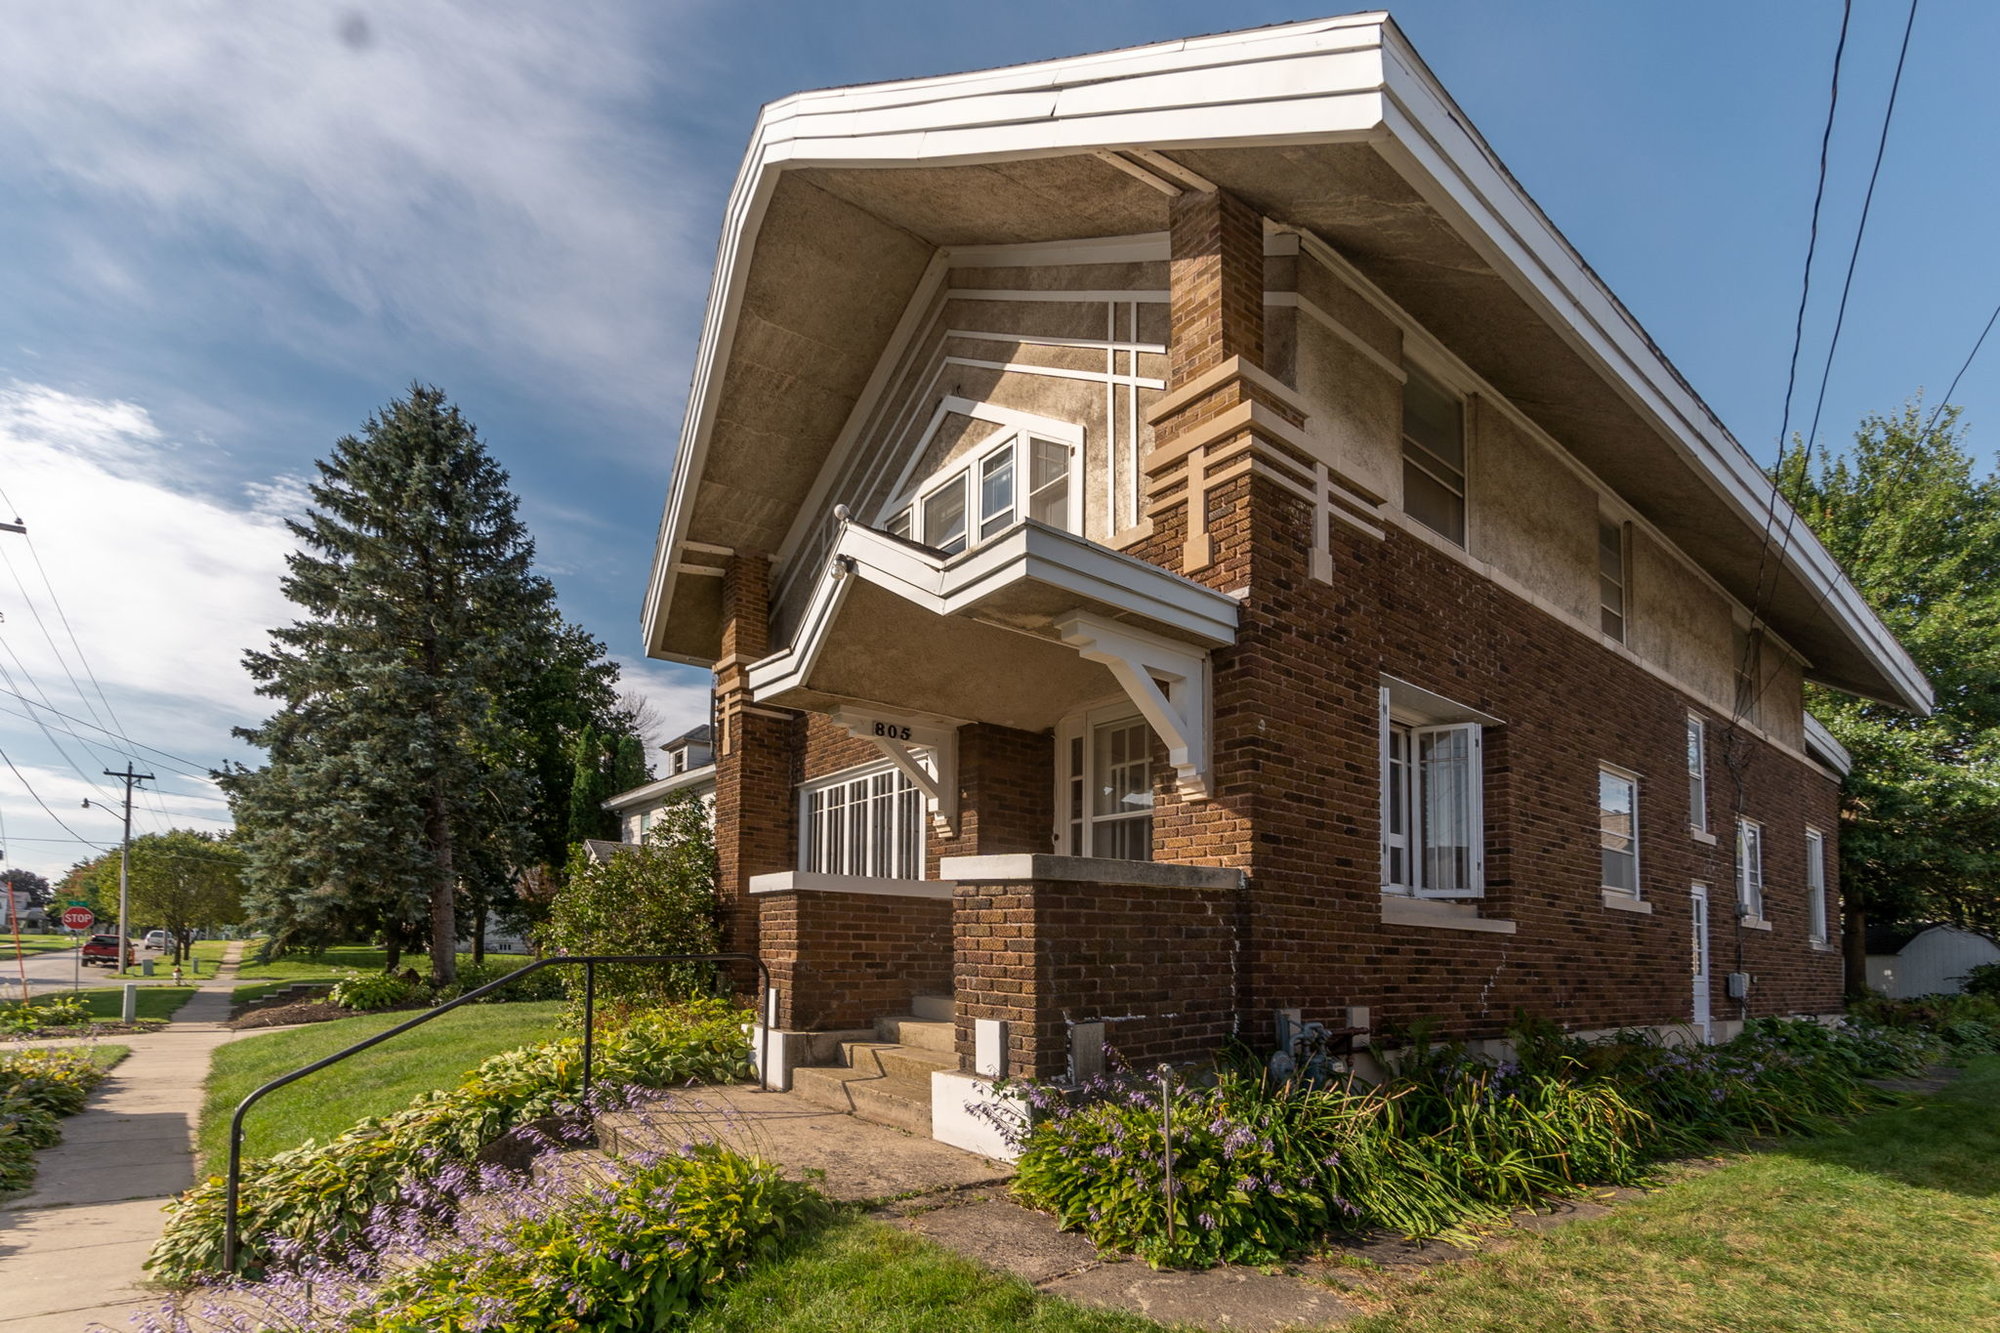 Classic Craftsman Character Found Throughout this Grundy Center Home 